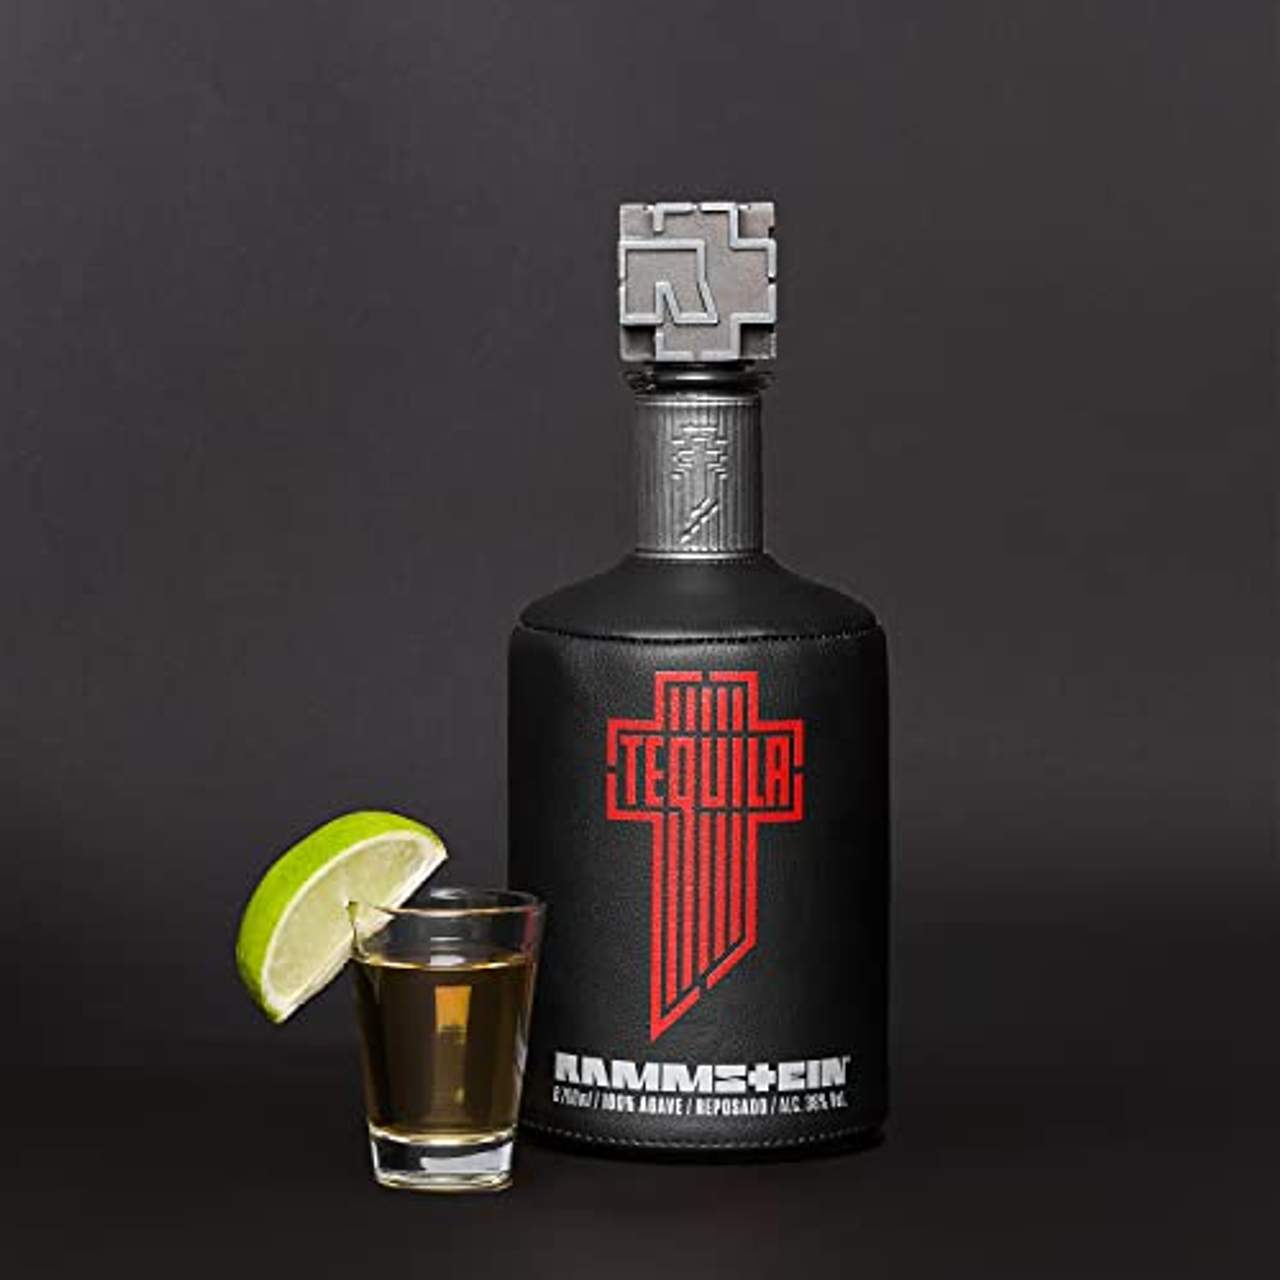 Rammstein Tequila Reposado Agave